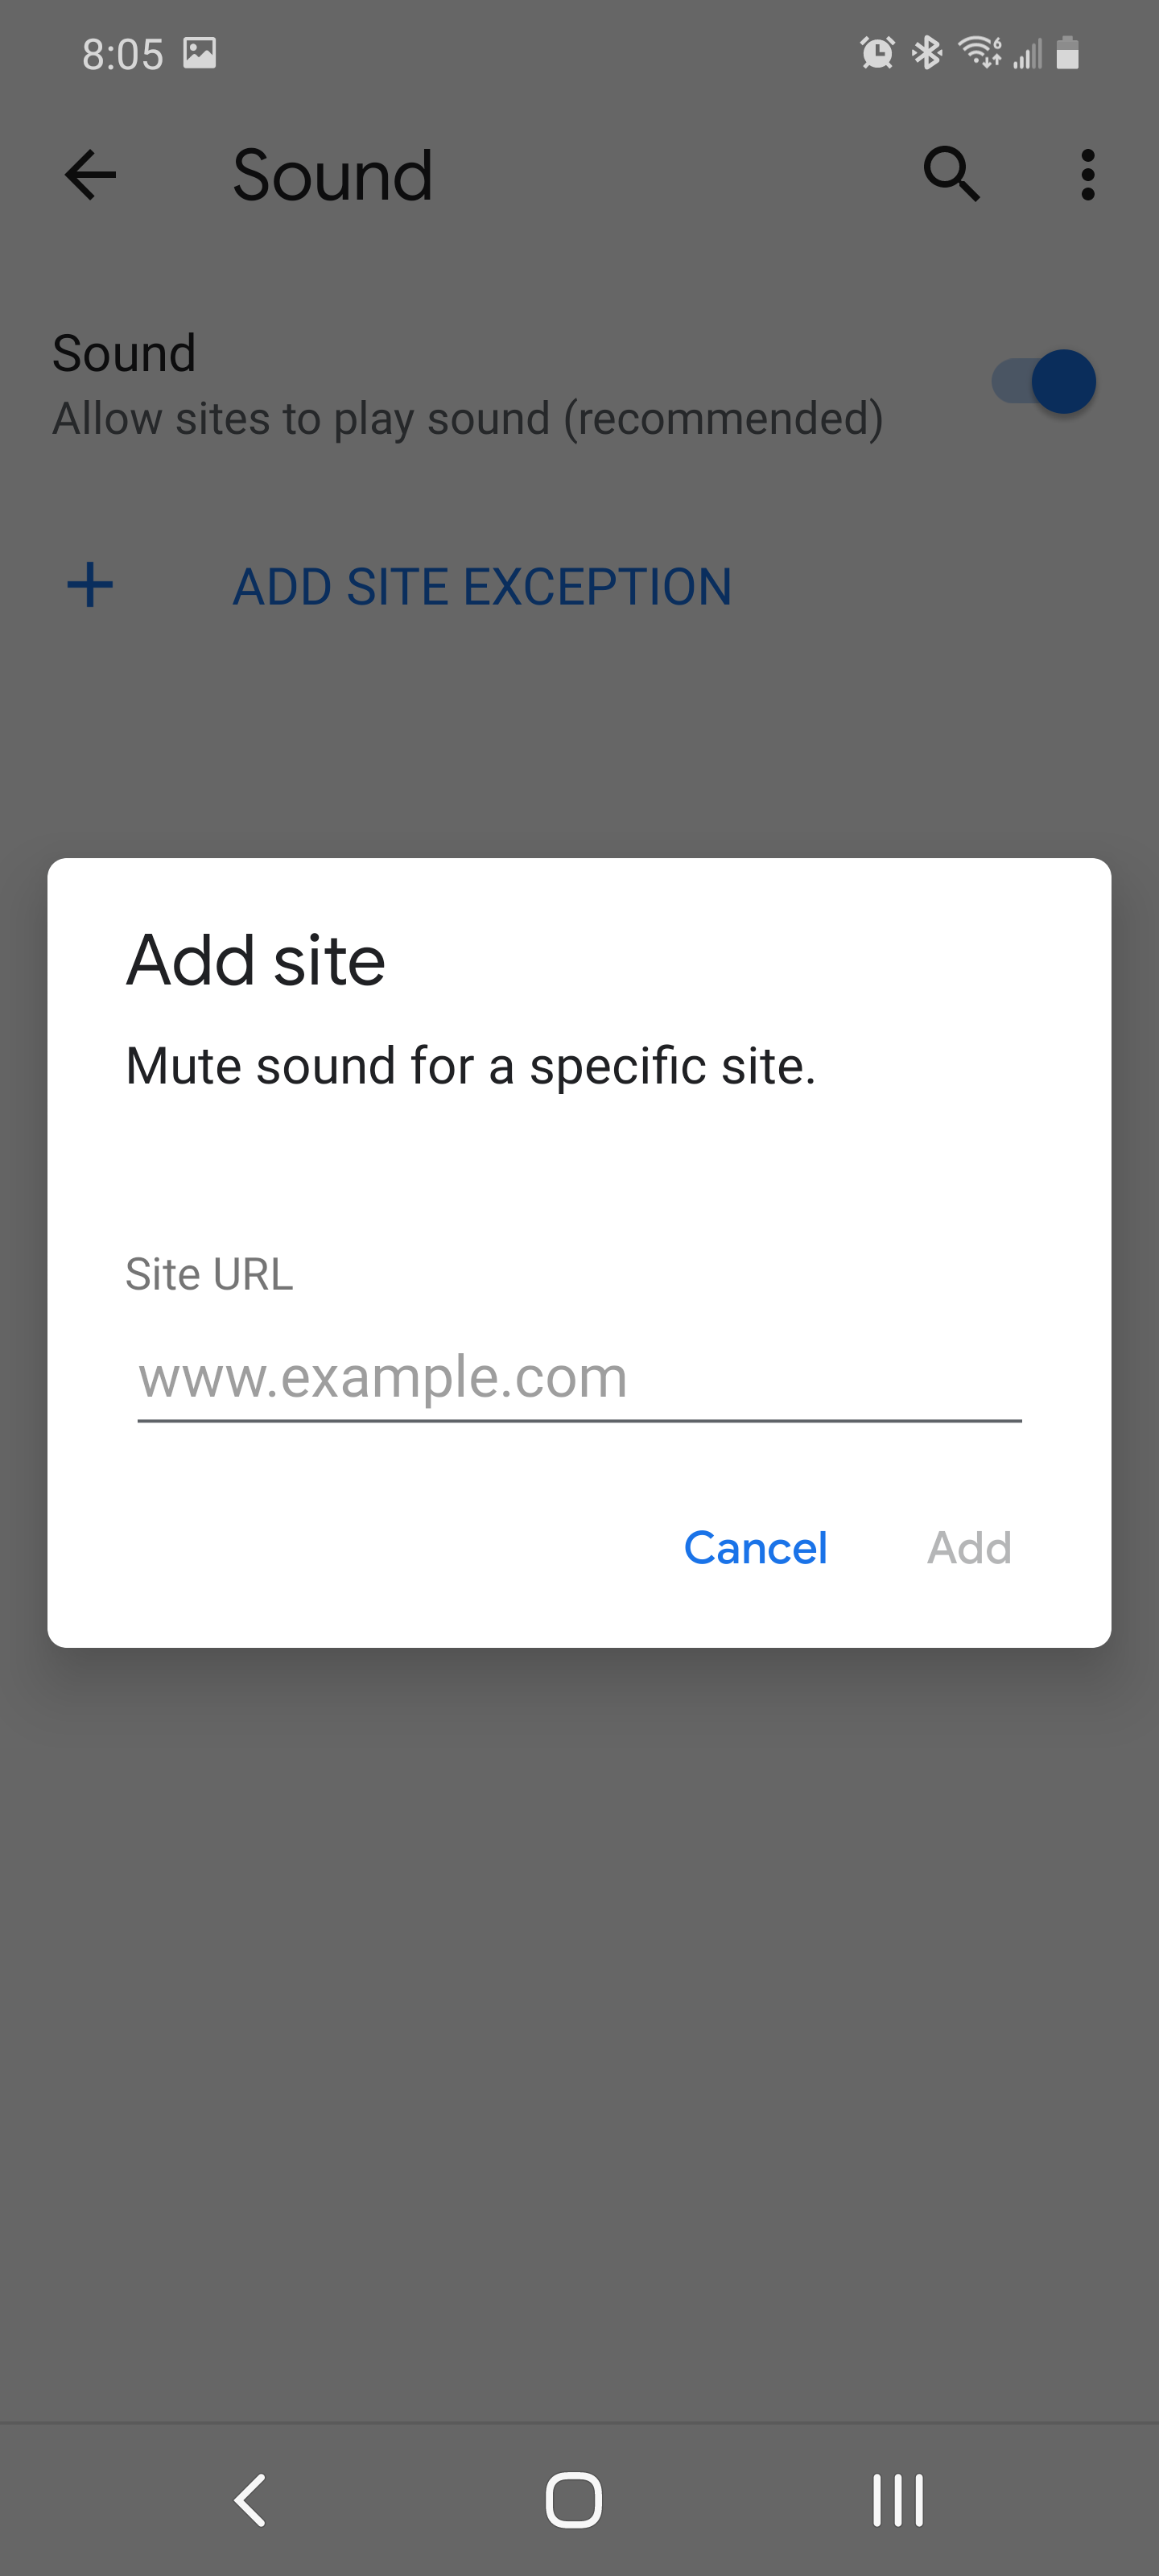 The Add site dialog box in the Sound settings in the Chrome mobile app